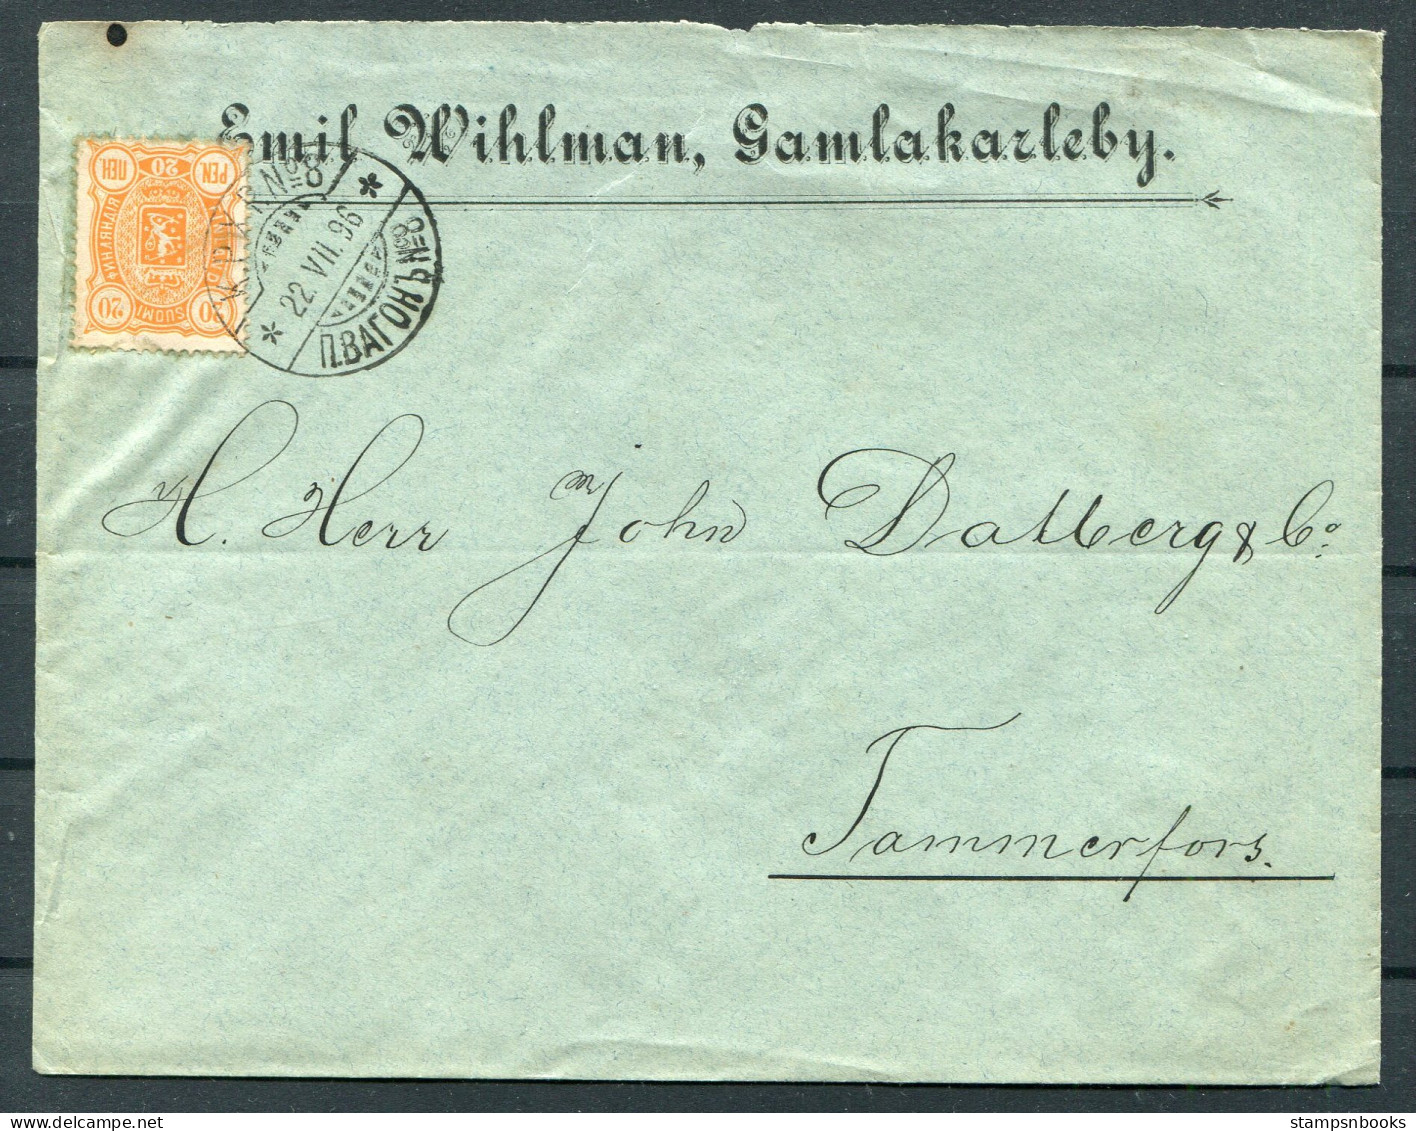 1896 Finland K.P.X.P. Railway TPO Cover - Tammerfors - Covers & Documents